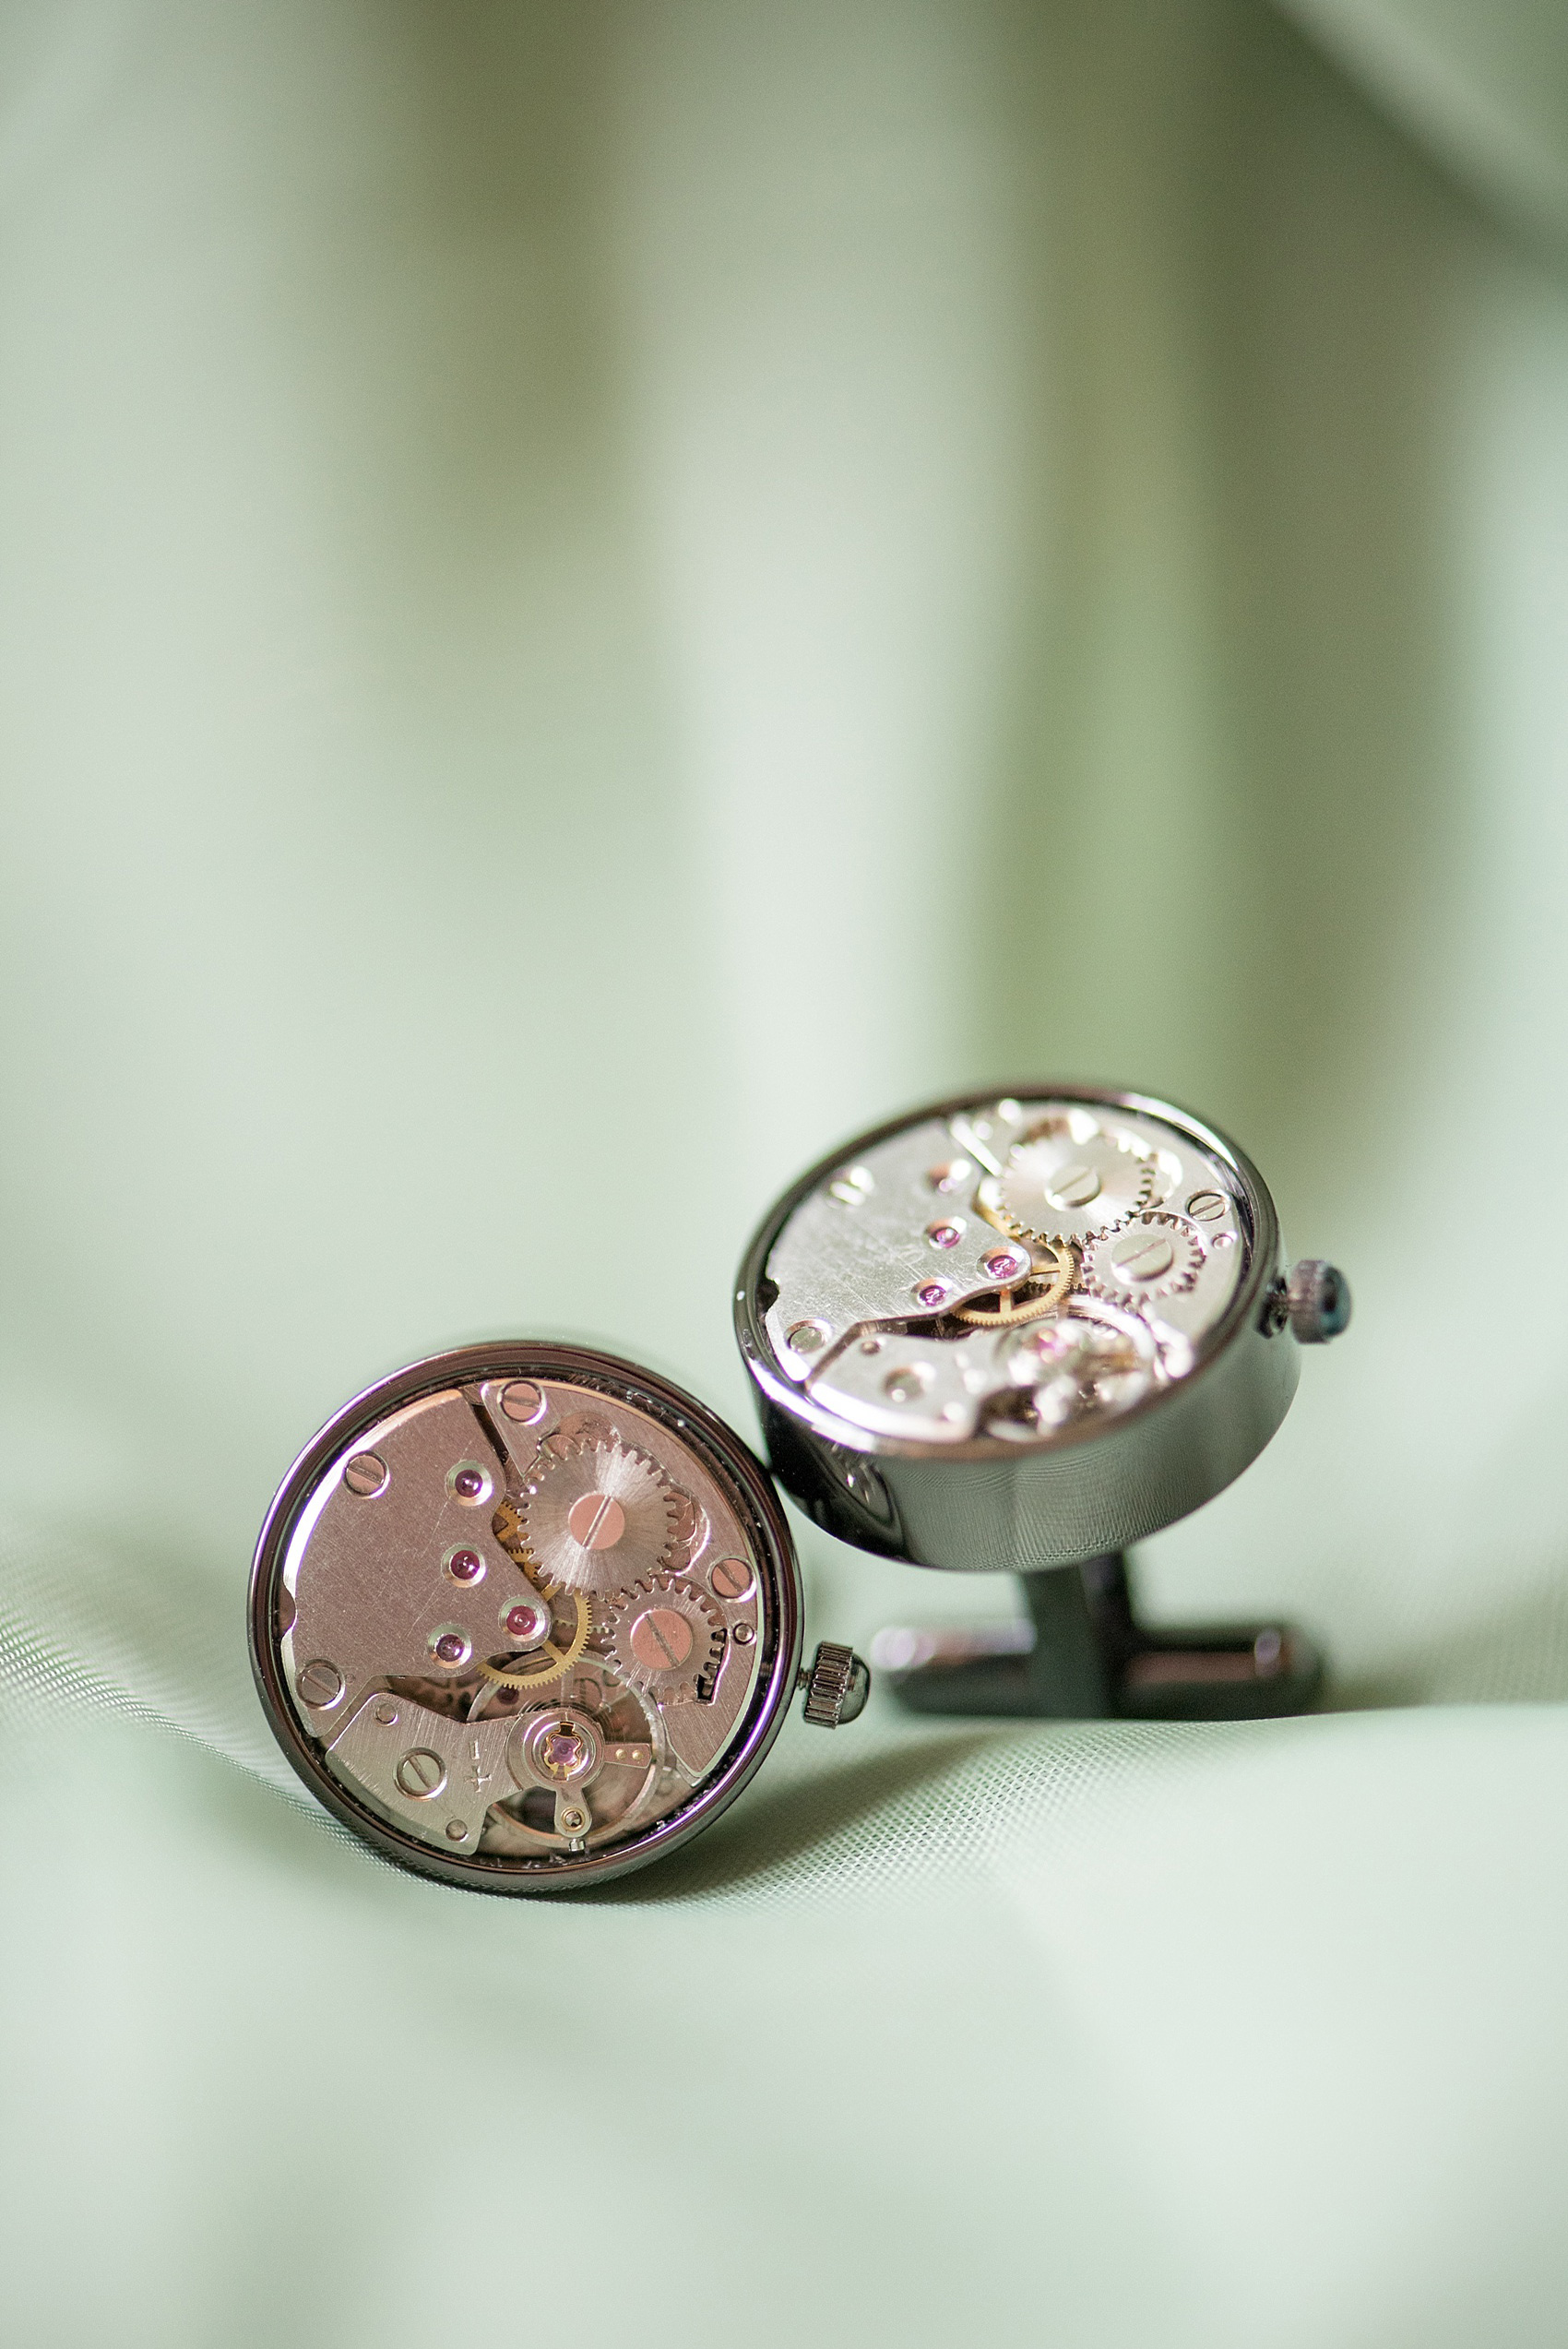 Mikkel Paige Photography photo of clock cufflinks at Hotel Los Gatos California for a wedding at Testarossa Winery.